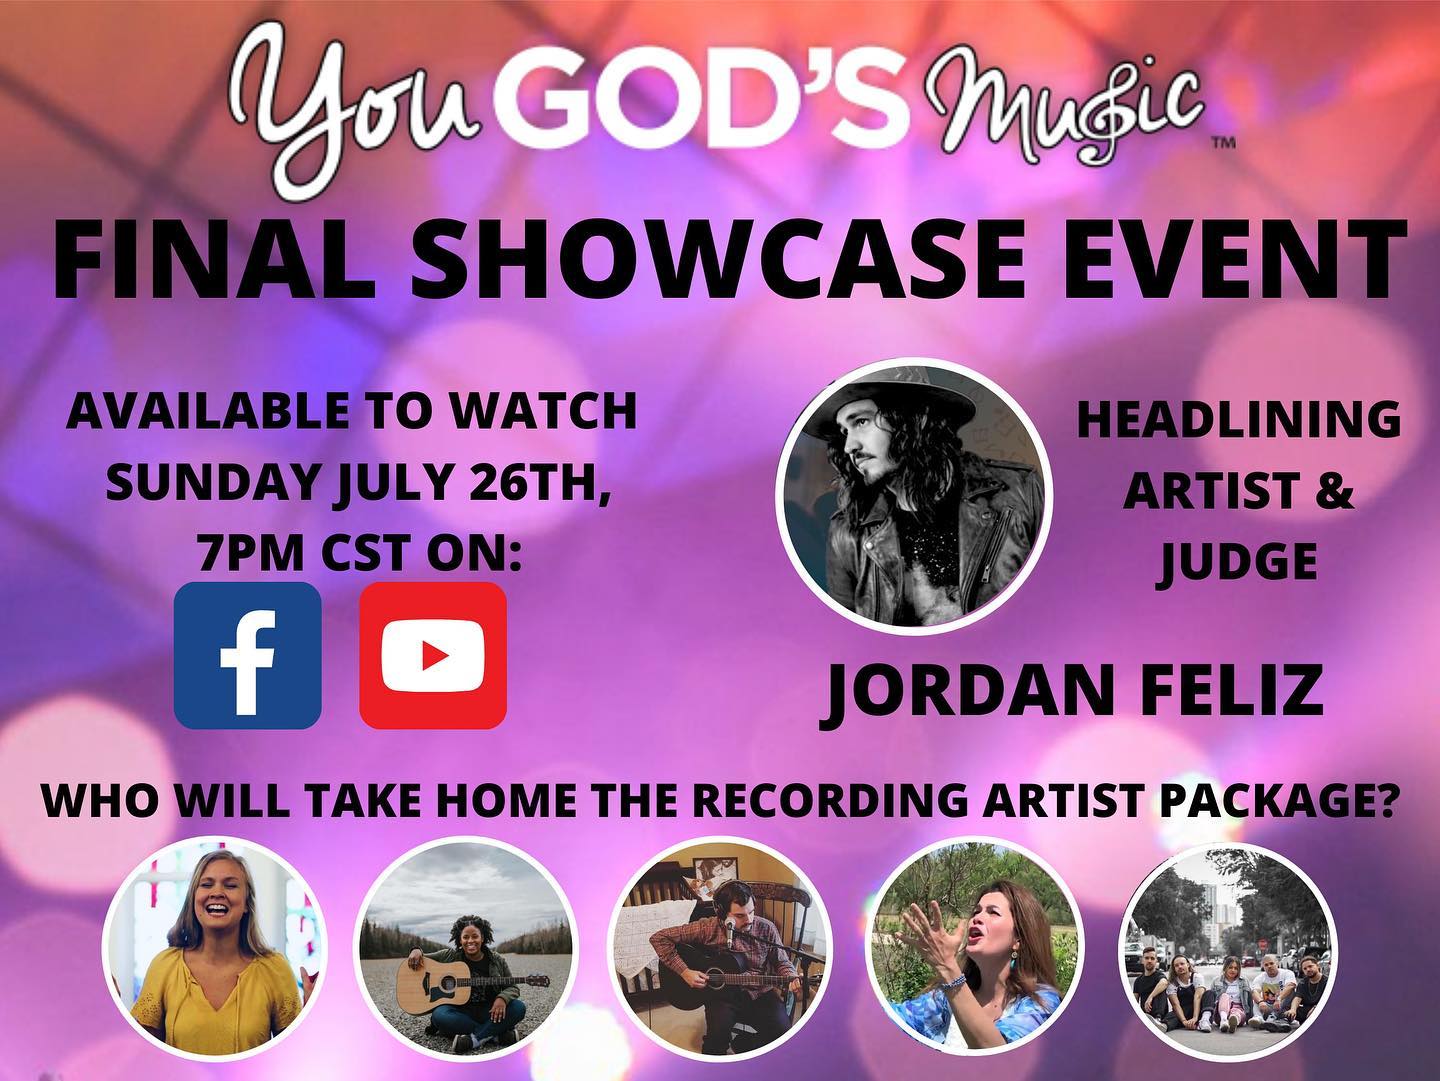 Our first Showcase Final event will be available to watch TOMORROW!